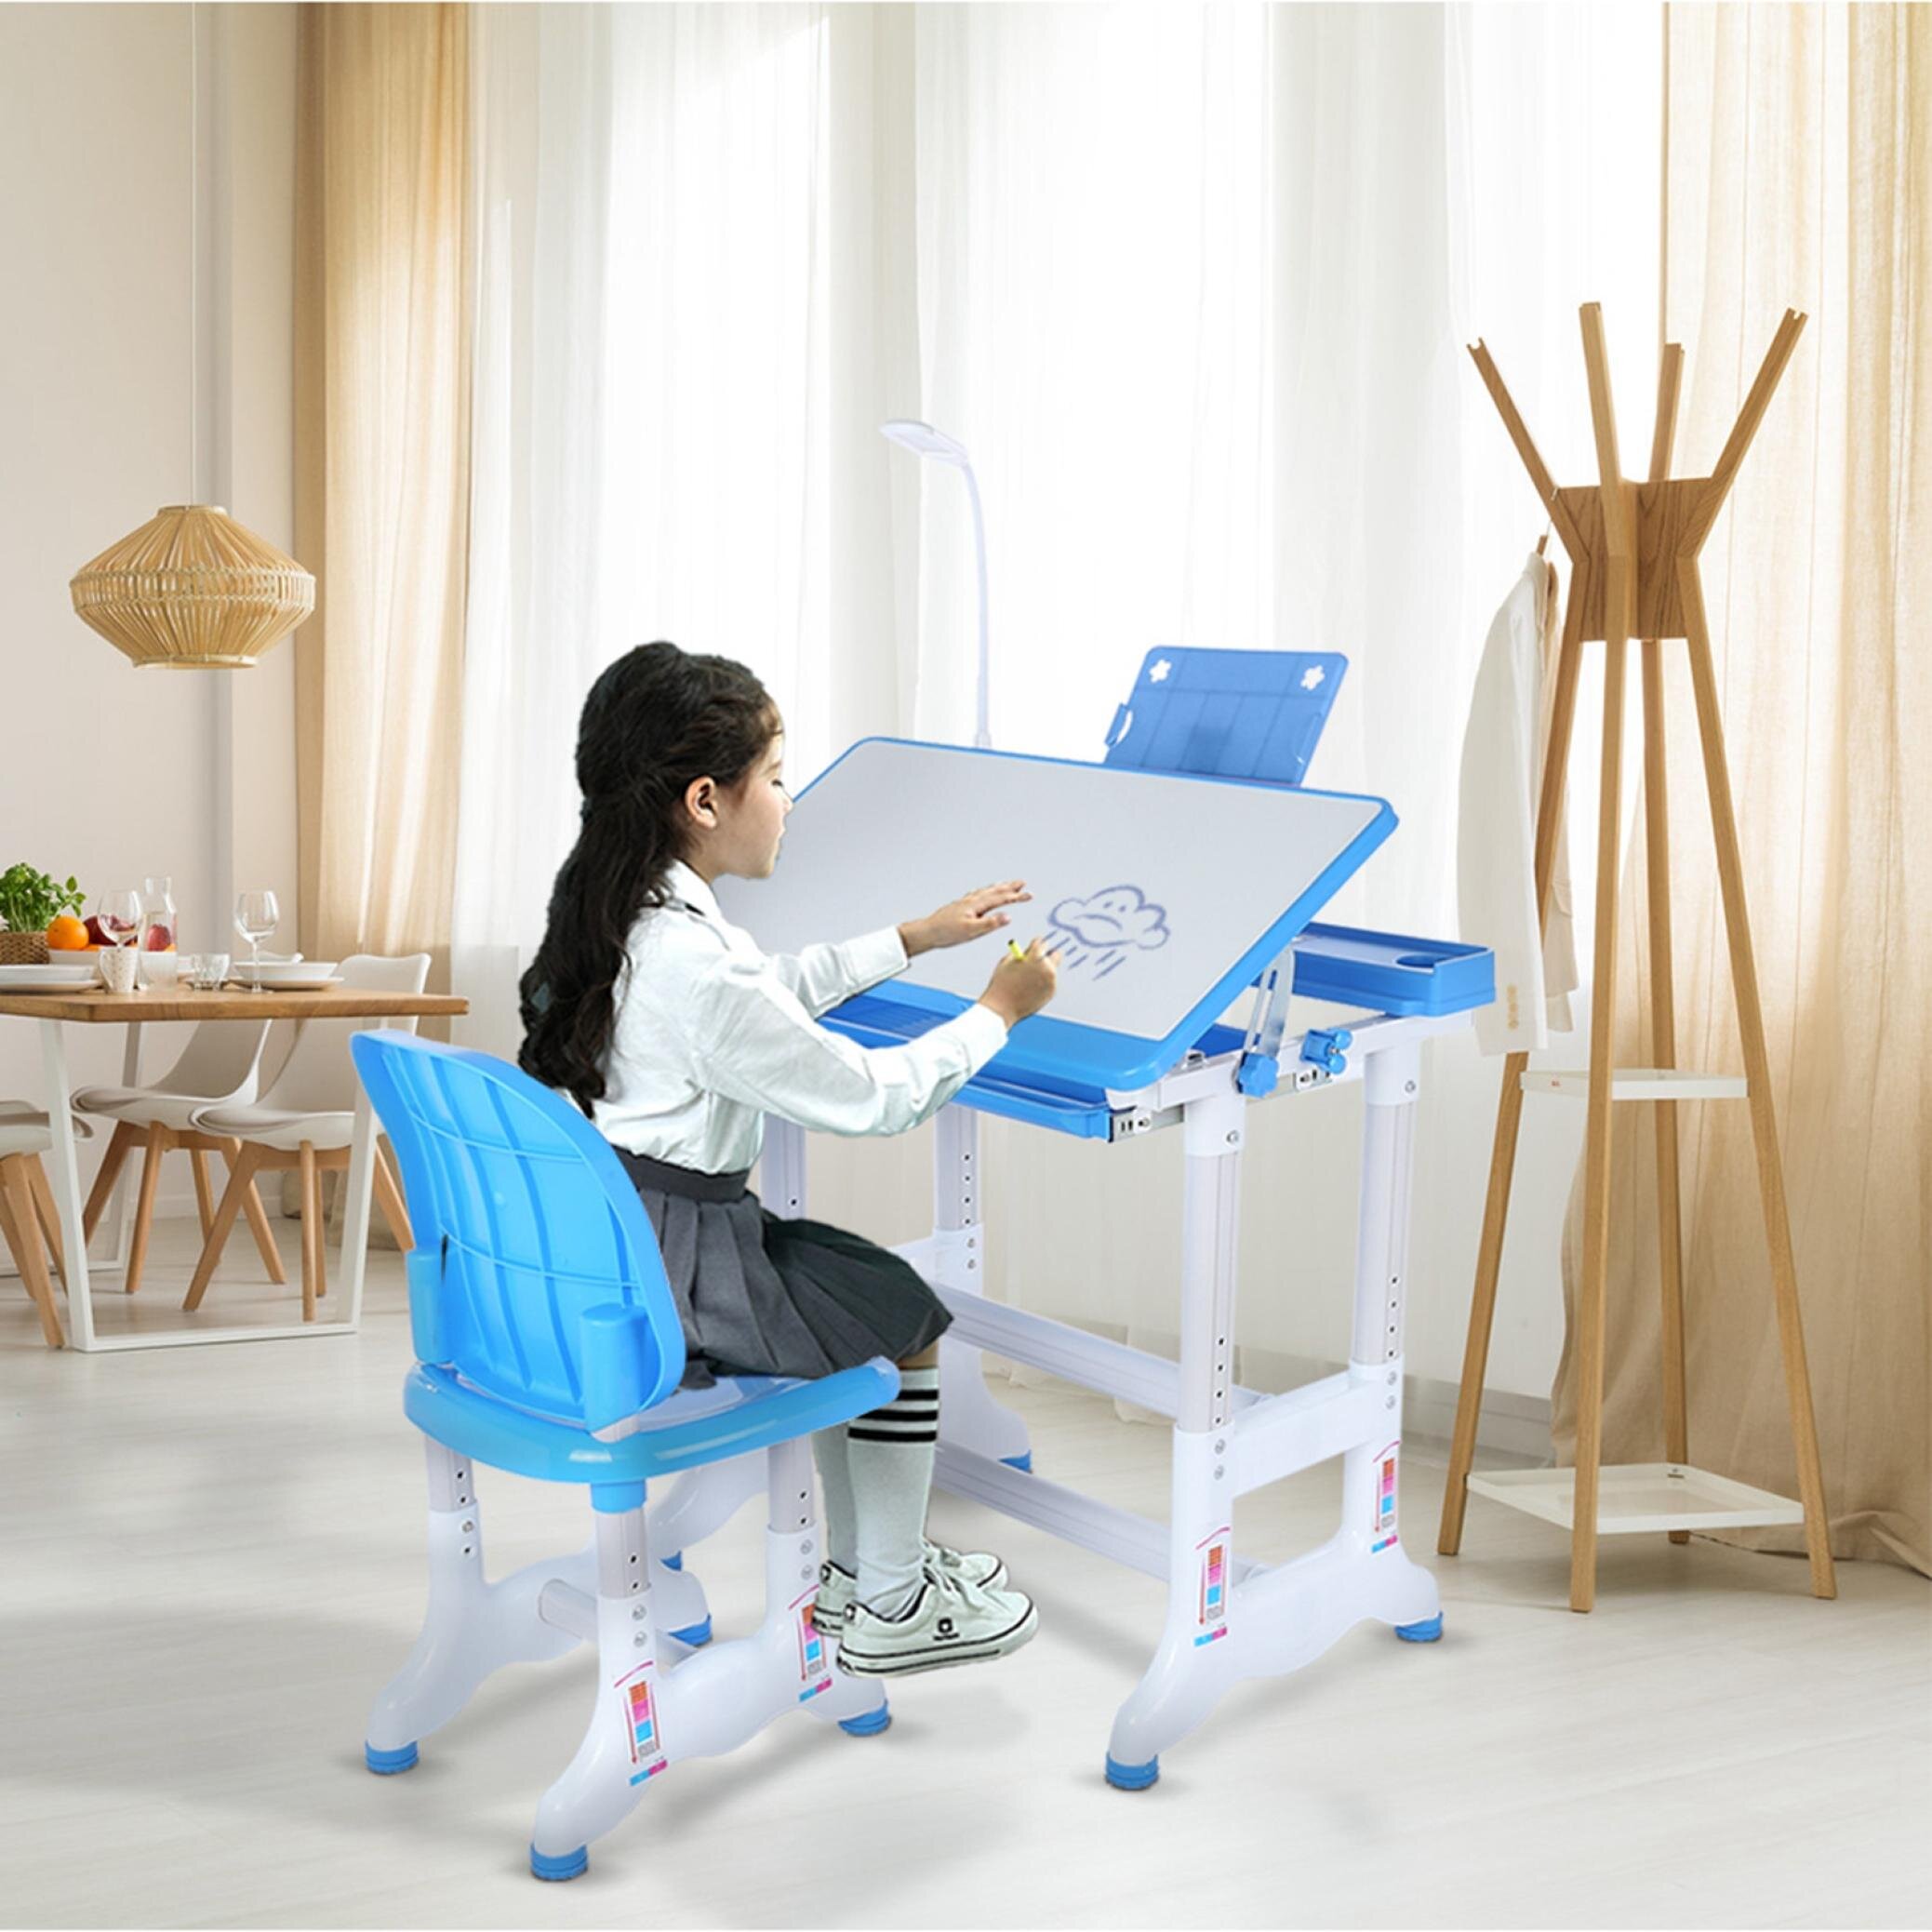 Blue Kids Desk and Chair Set,Height Adjustable Sturdy Children Study Table,with Drawer Storage,Pen Groove,Handy Hook